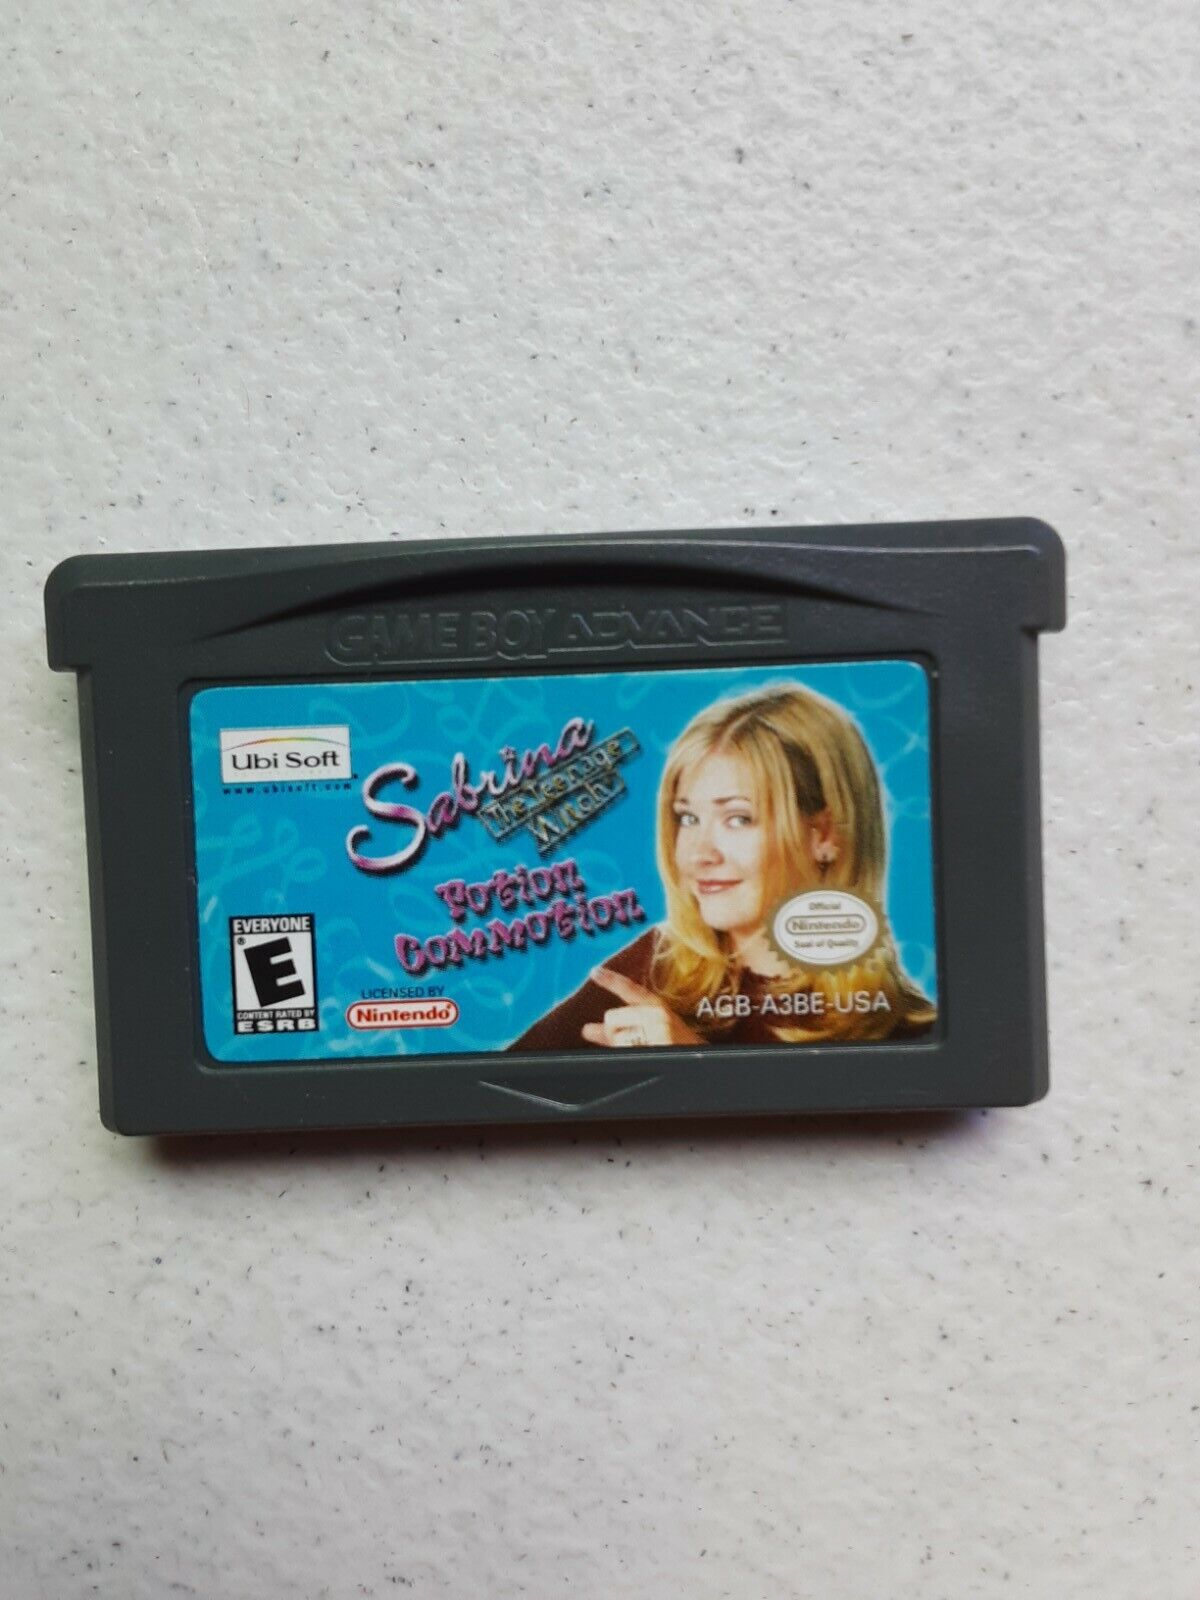 Nintendo Game Boy Advance Sabrina the Teenage Witch Potion Commotion Video Game